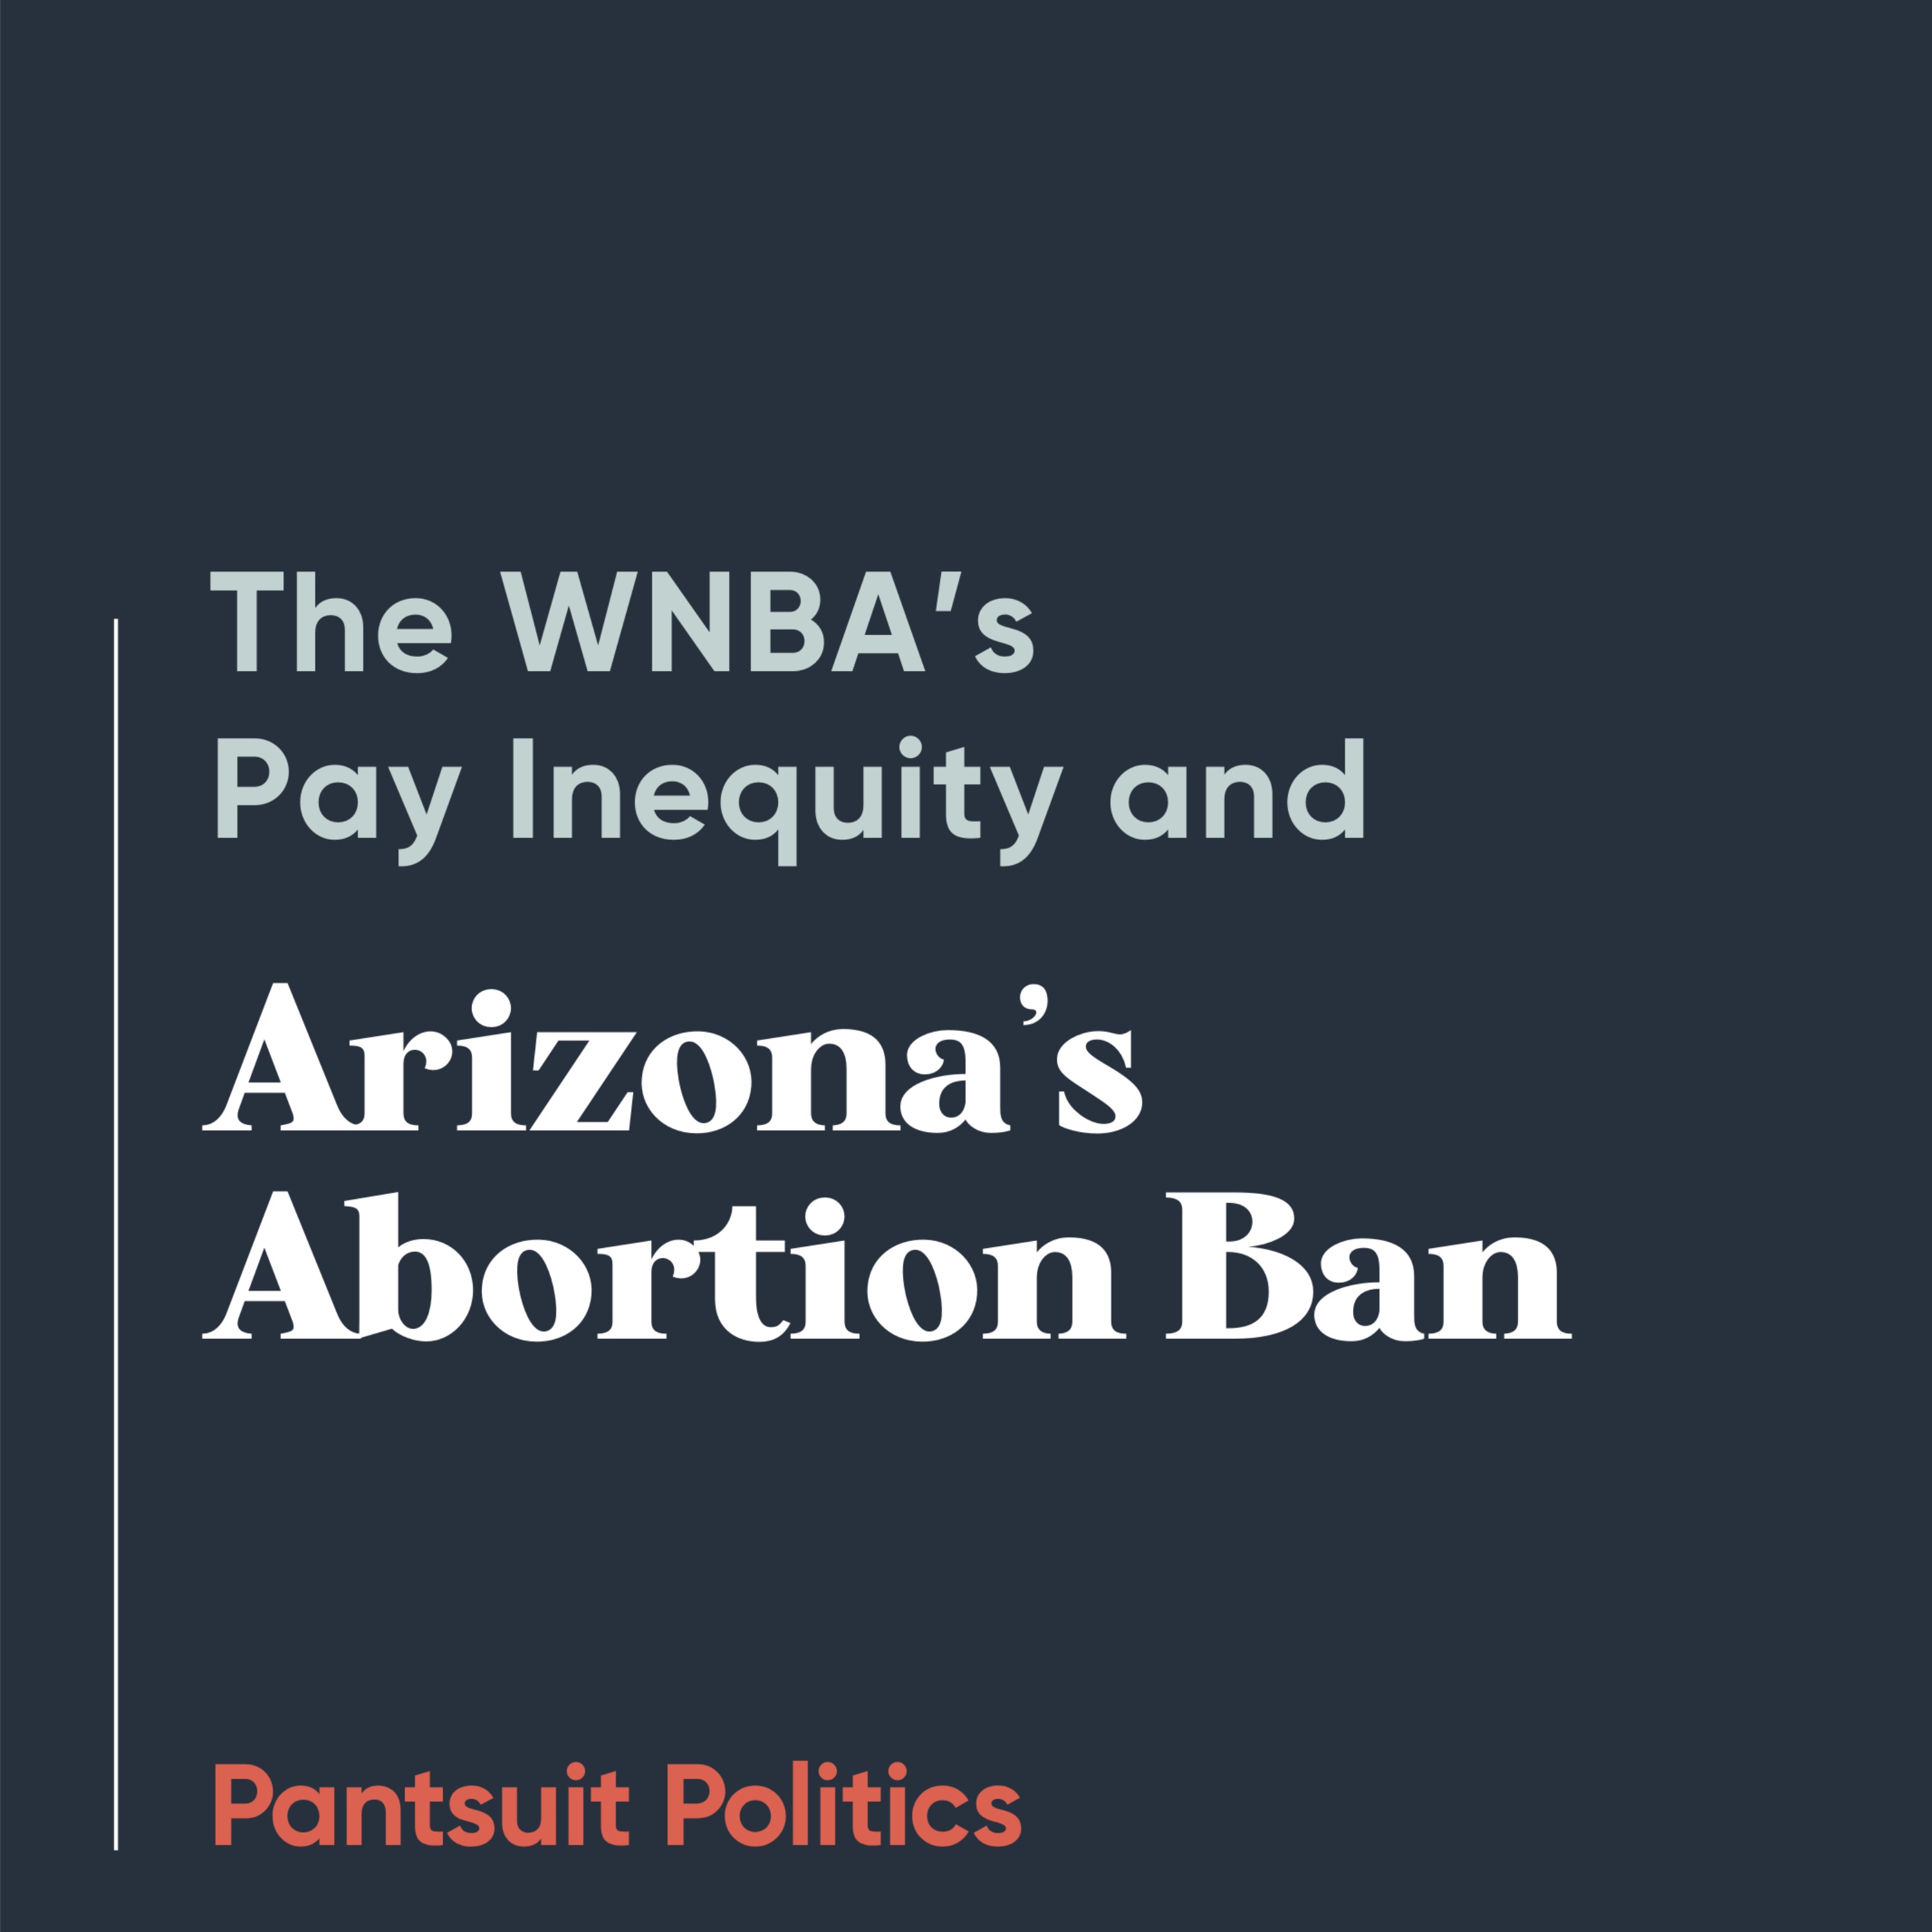 The WNBA’s Pay Inequity and Arizona’s Abortion Ban